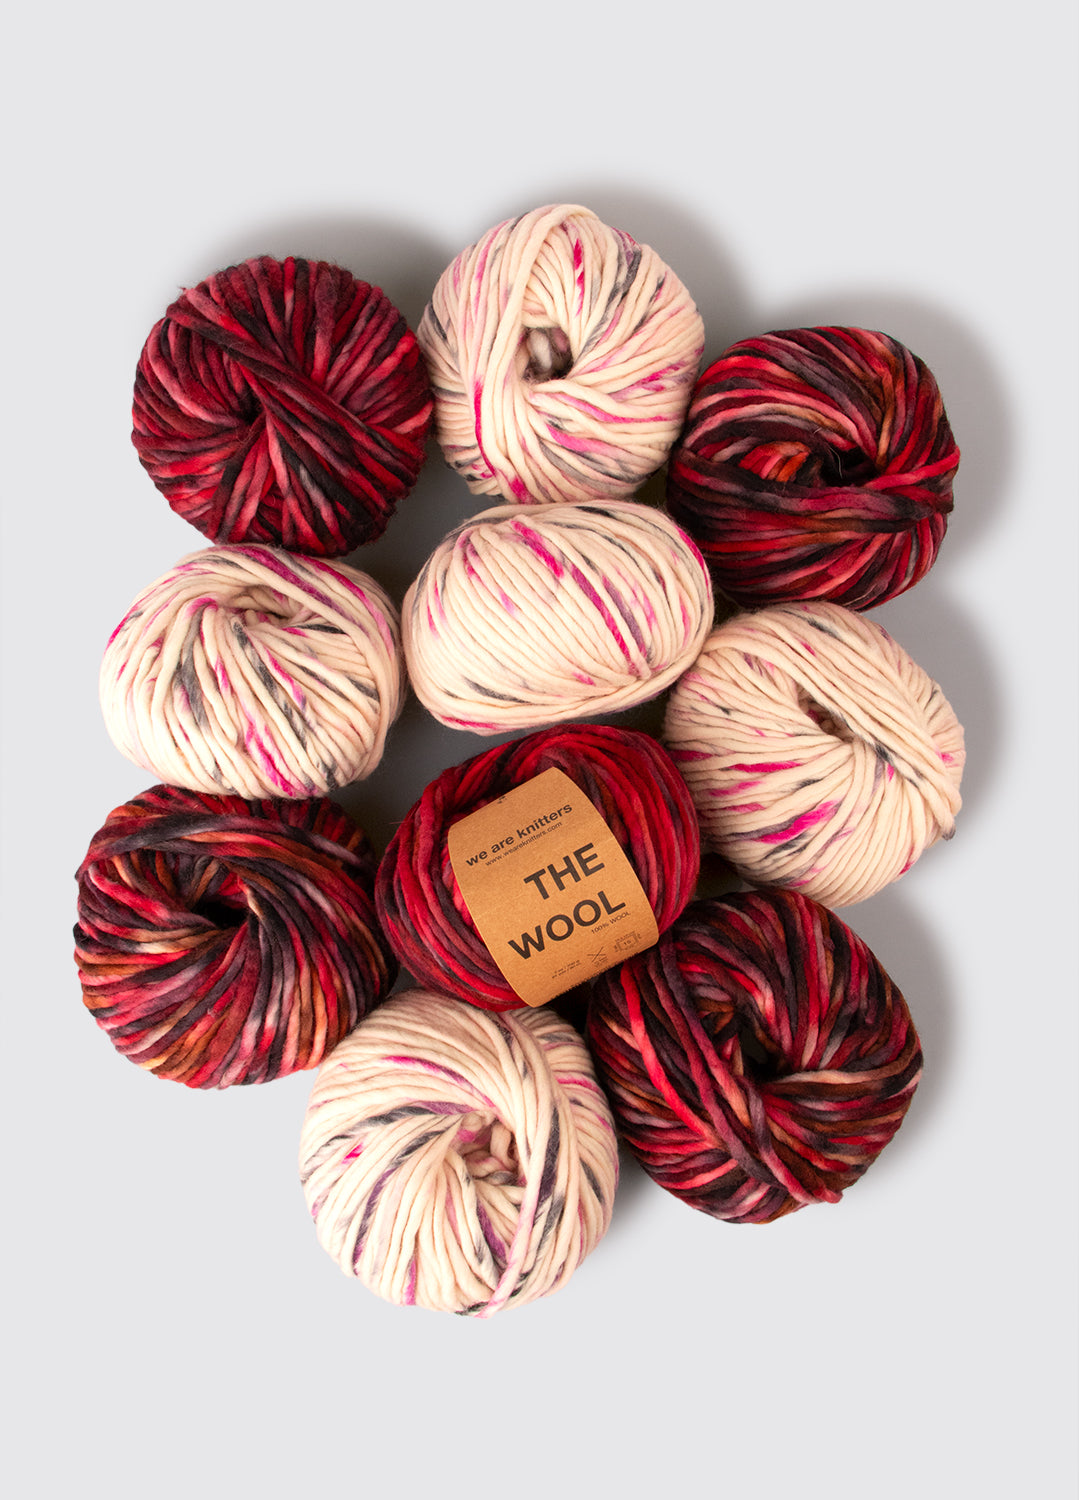 10 Pack of The Wool Yarn Balls